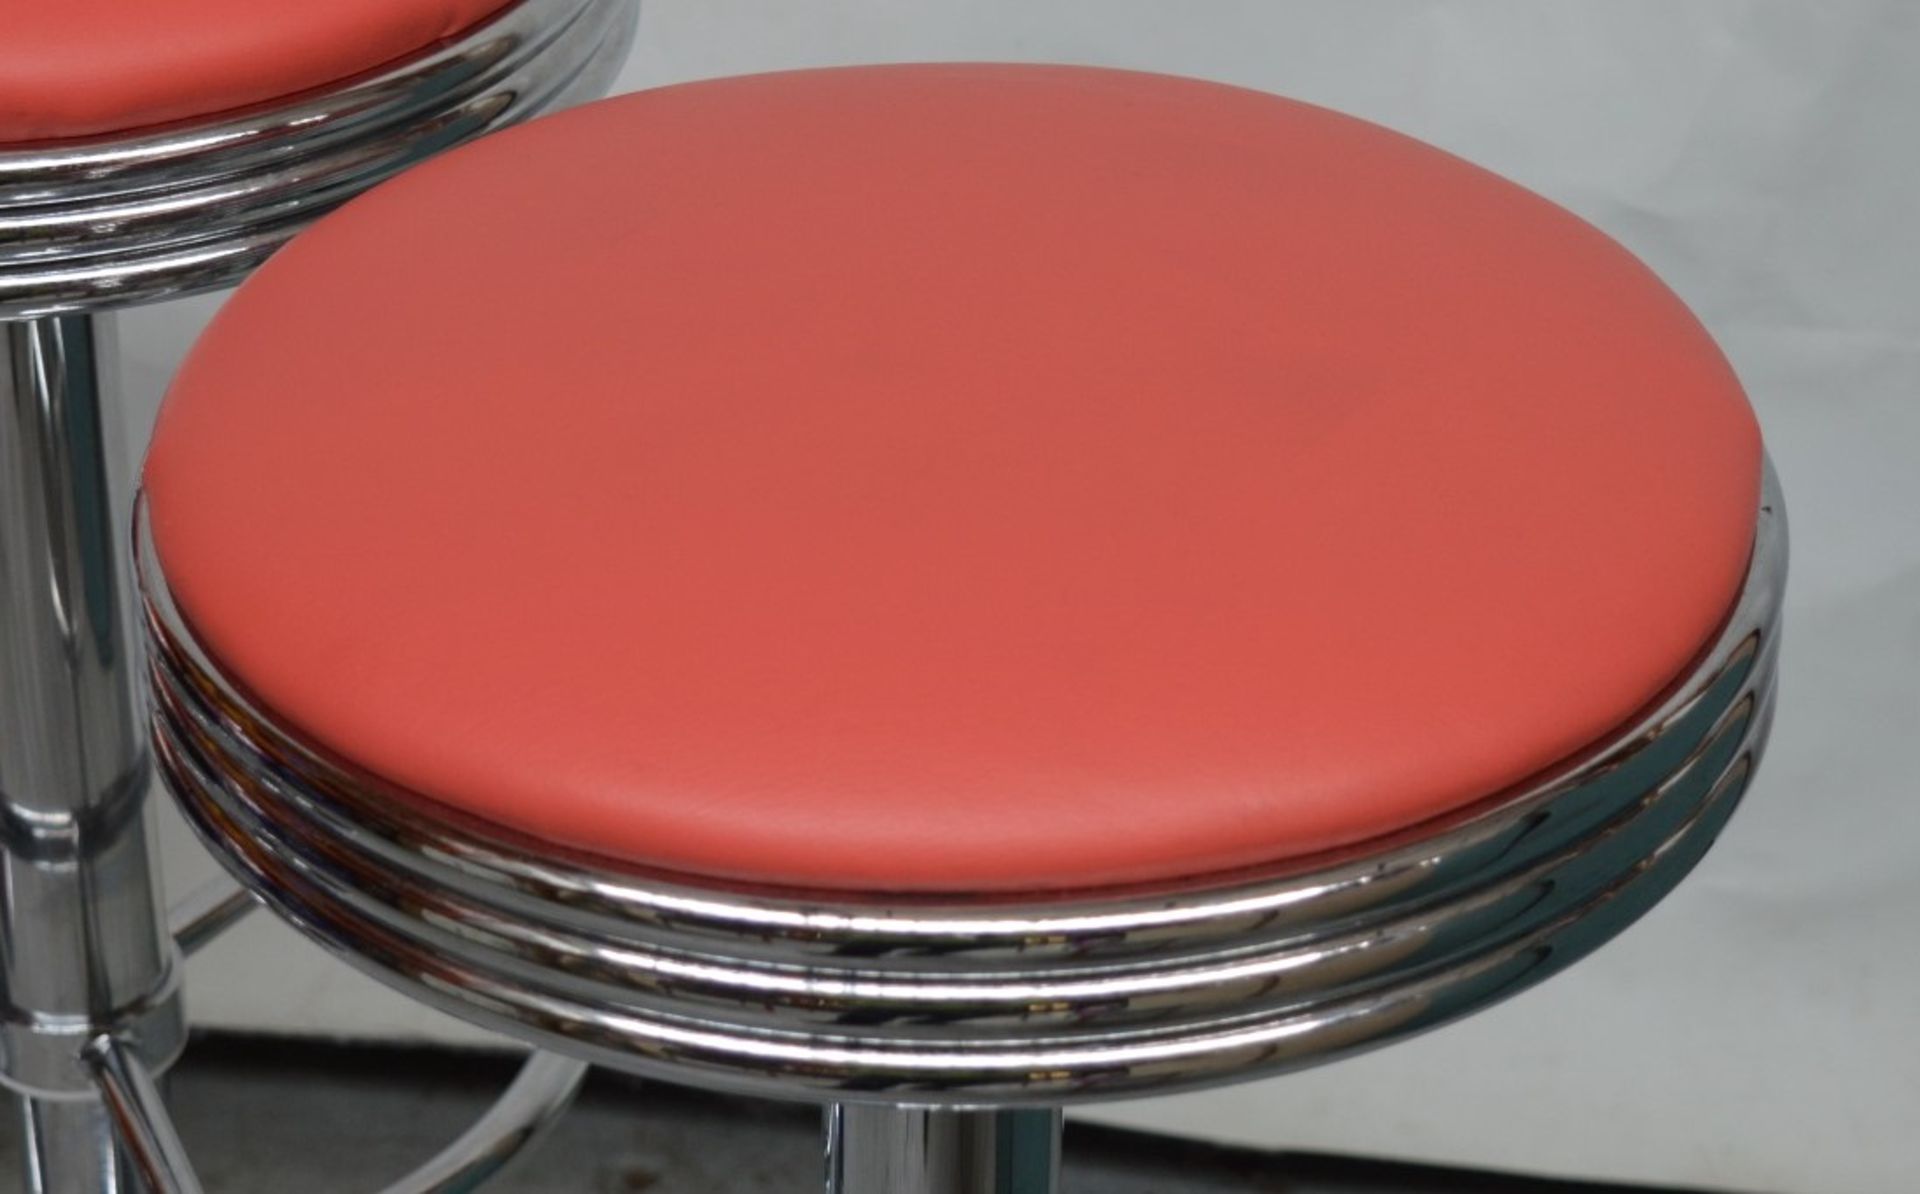 4 x Retro American Roadside Diner Themed Gas Lift Bar Stools - CL164 - Fantastic Stools With Full - Image 7 of 14